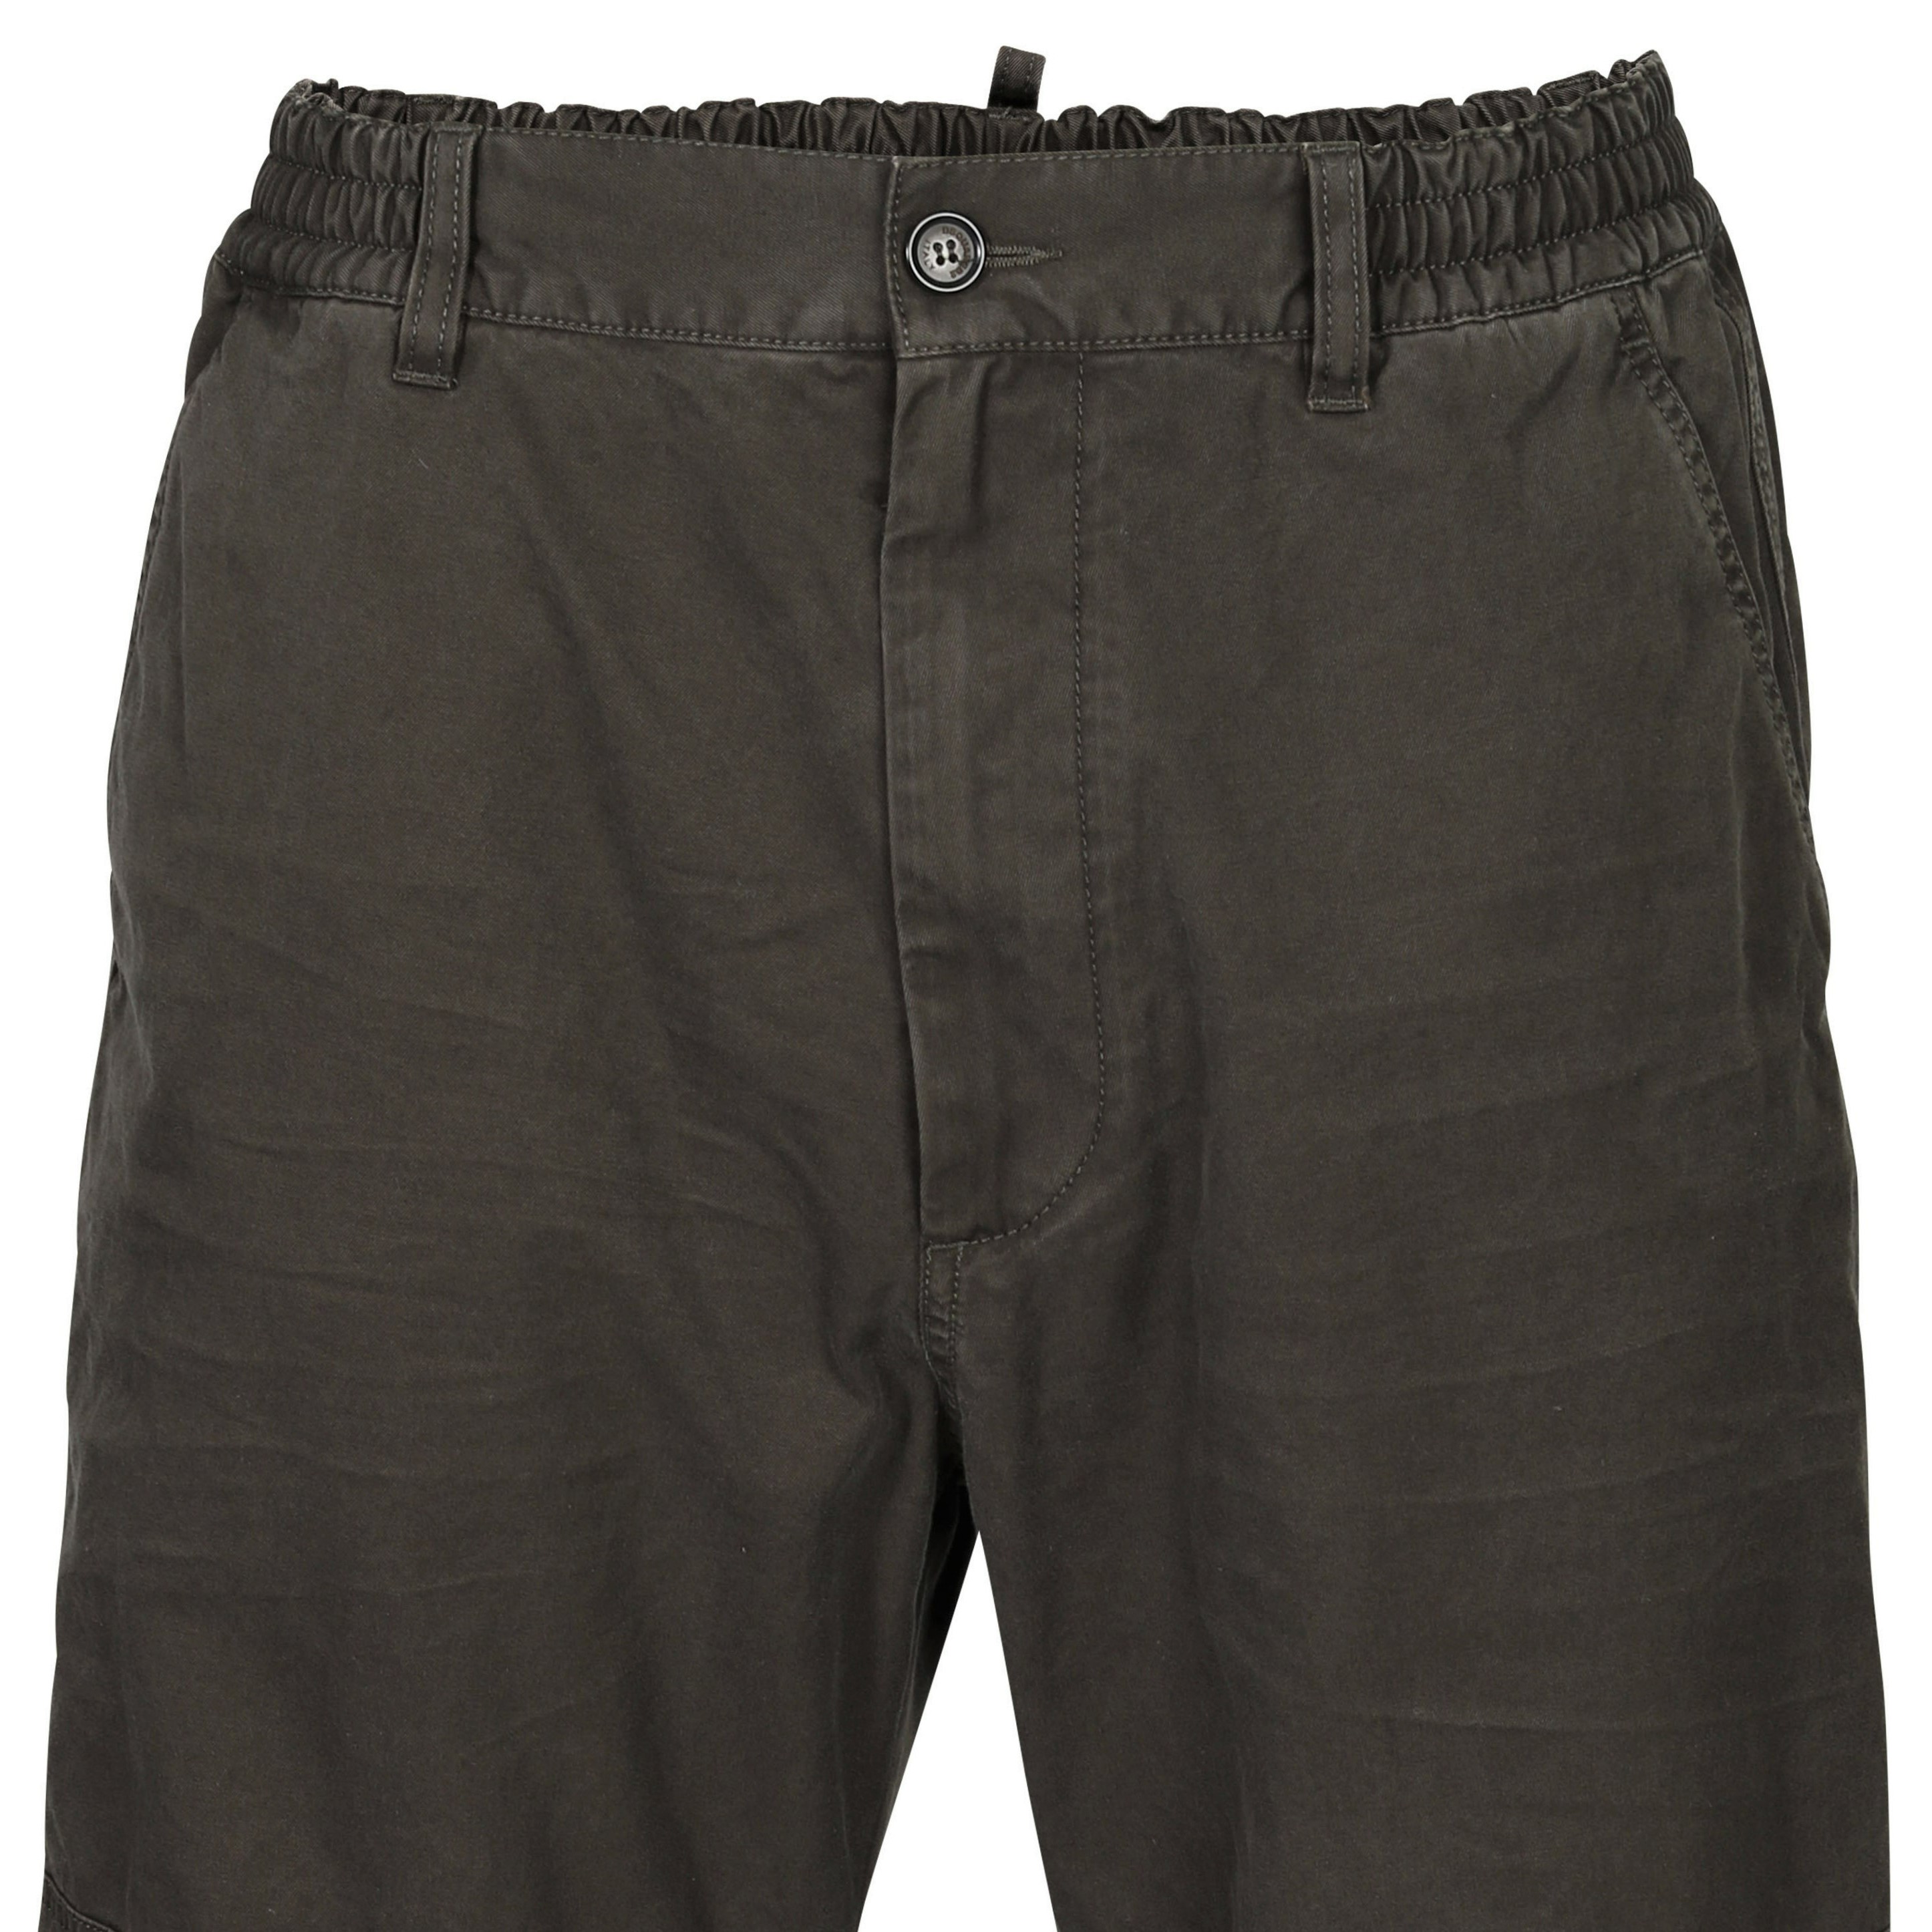 Dsquared Pully Pant in Dark Olive 46